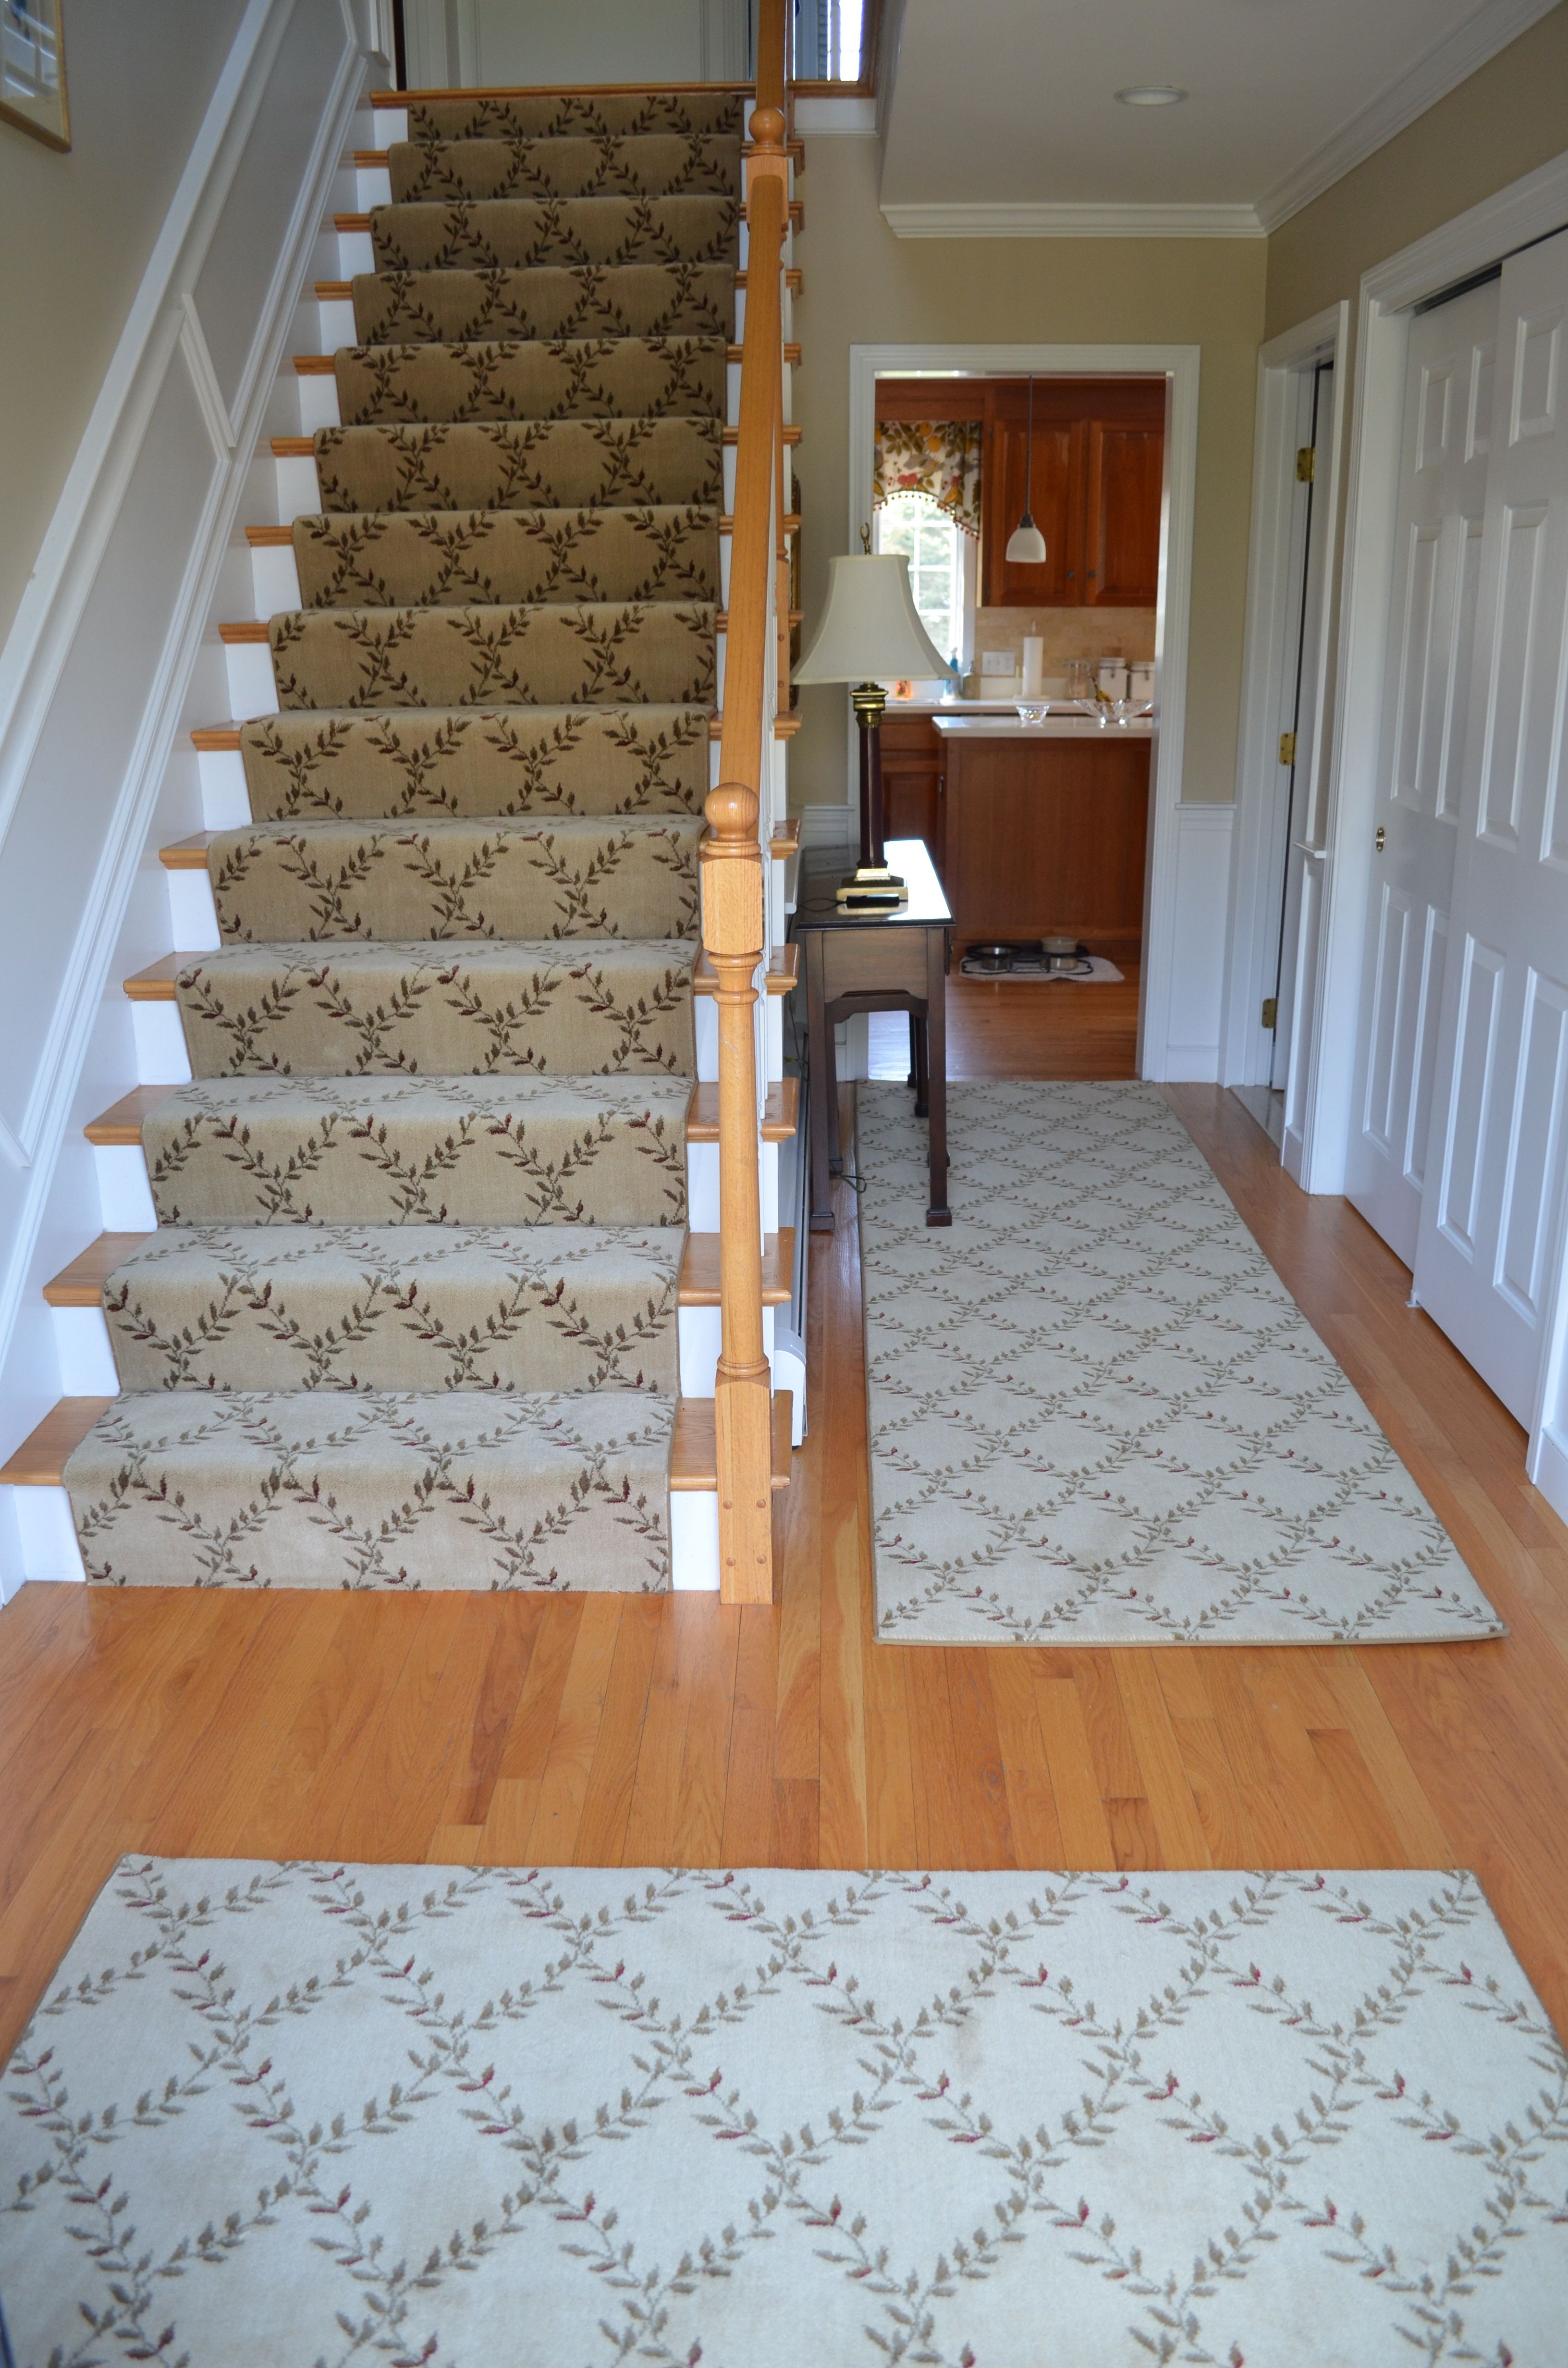 Carpet Runner For Stairs Within Runner Carpets Hallway (View 3 of 20)